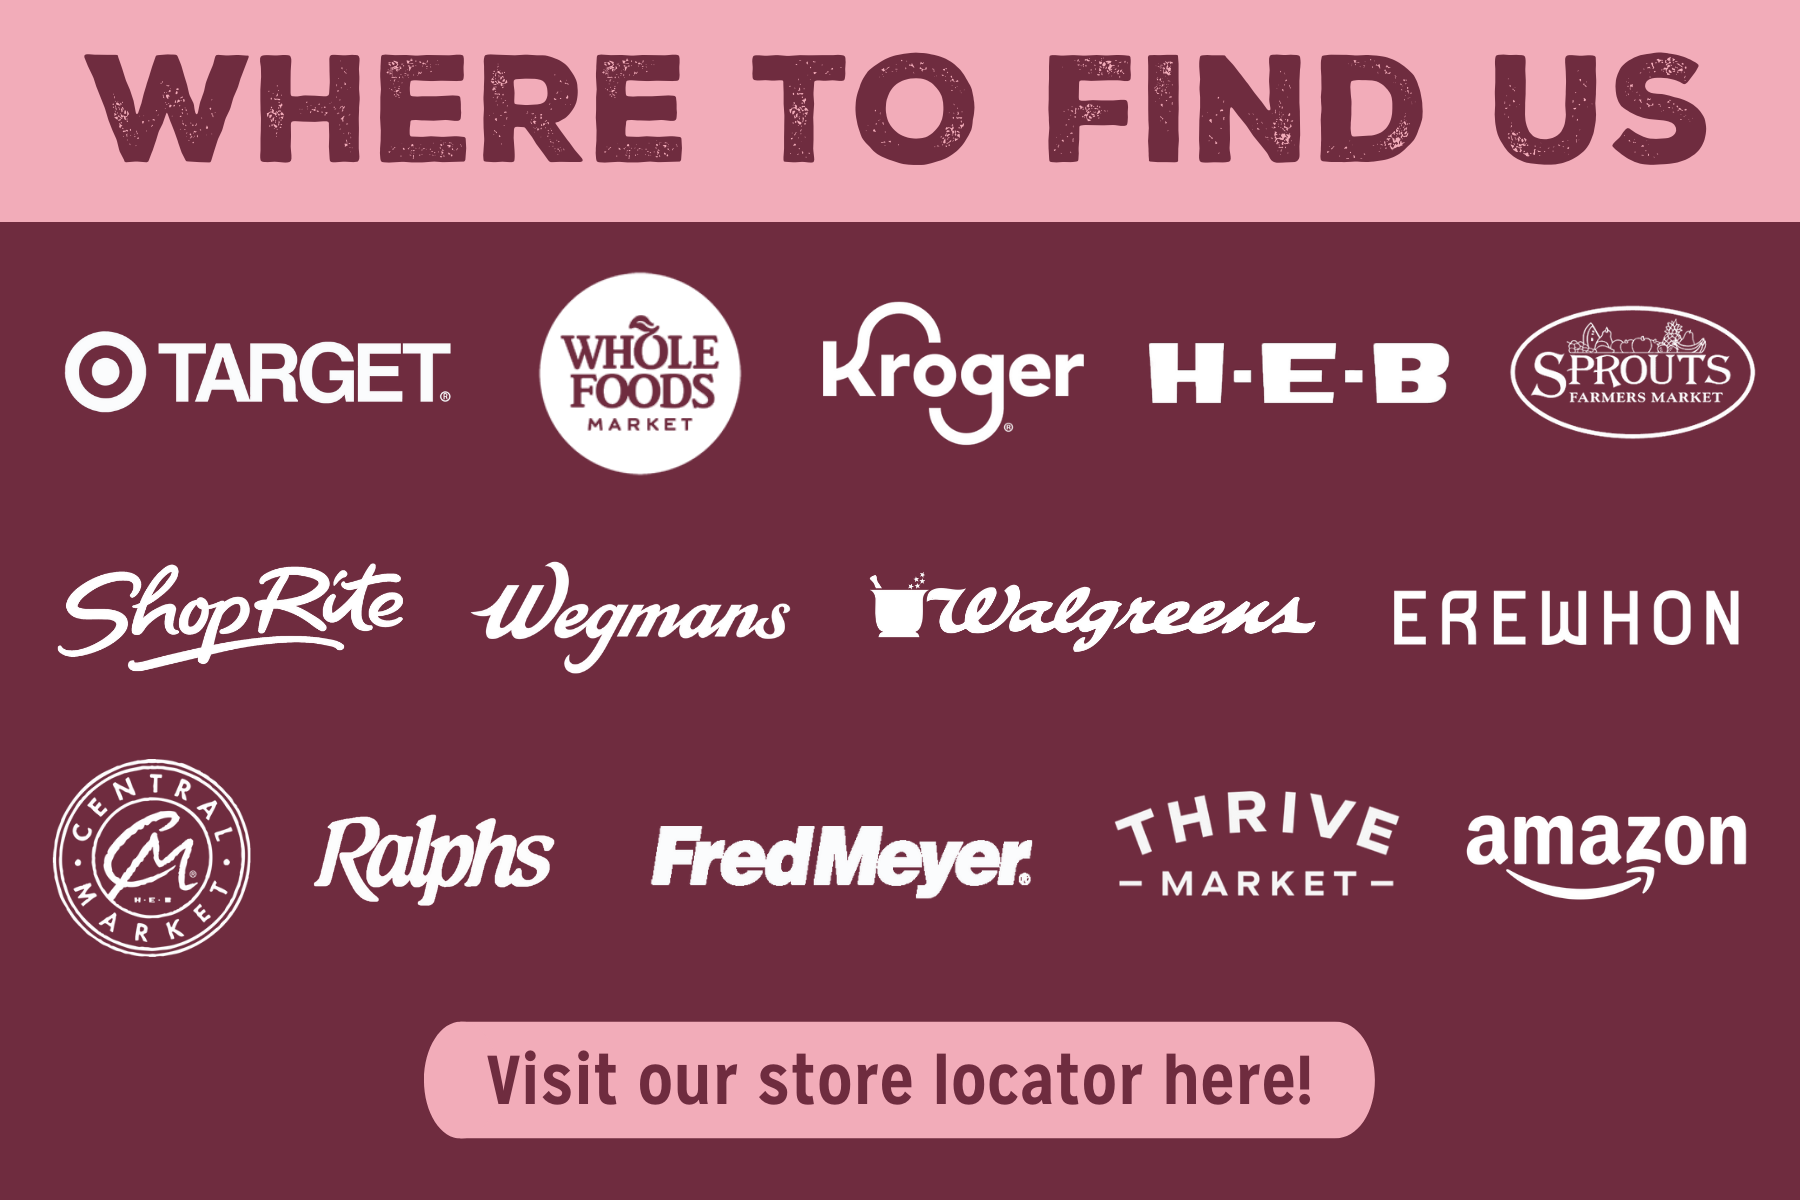 Find us at Target, Whole Foods, Kroger, HEB, Sprouts Farmers Market, ShopRite, Wegmans, Walgreens, Erewhon, Central Market, Ralph's, Fred Meyer, Thrive Market and Amazon. Click to Visit our Store Locator